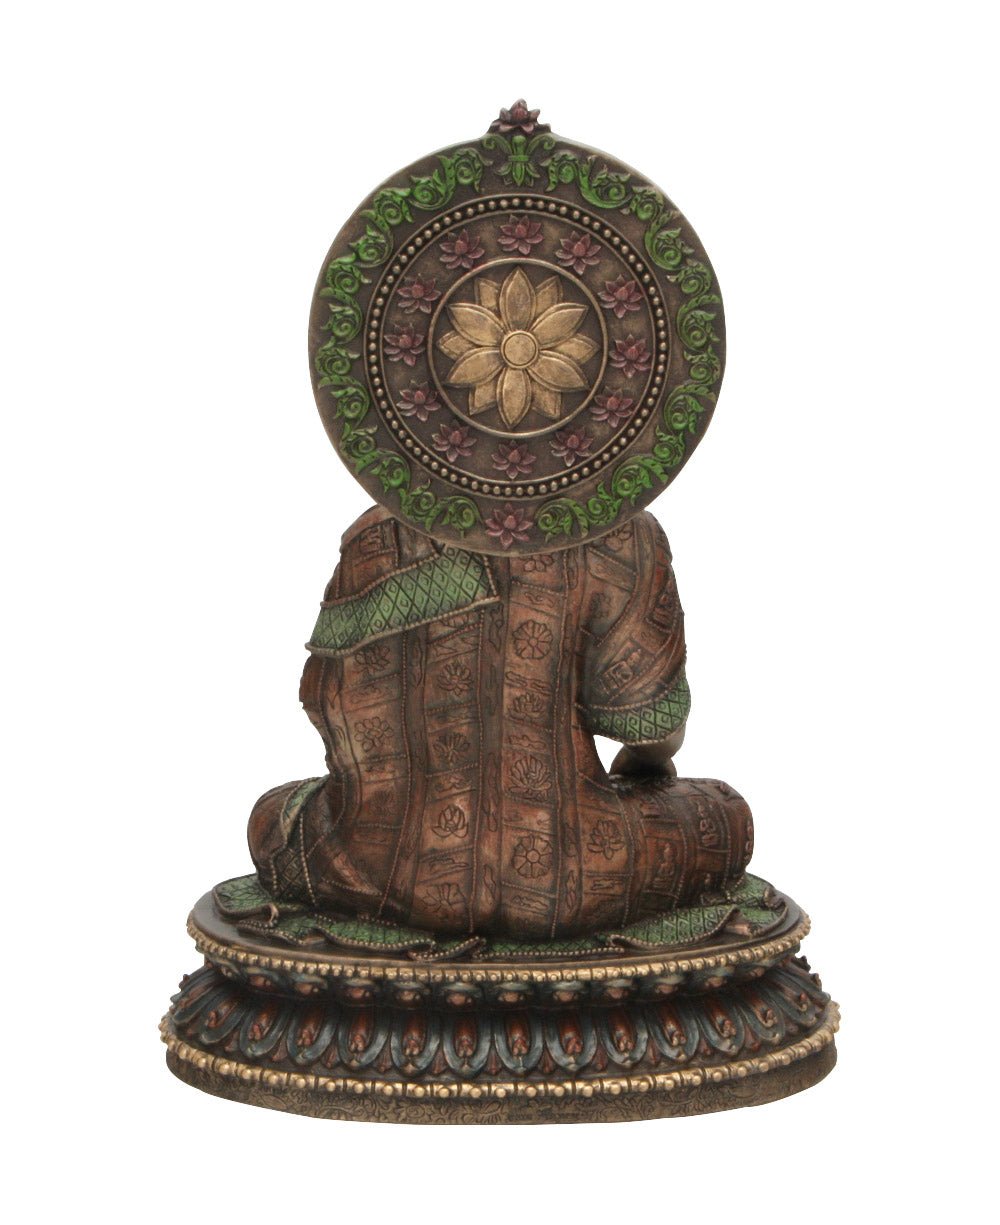 Detailed Meditating Buddha Statue, 10 Inches - Sculptures & Statues